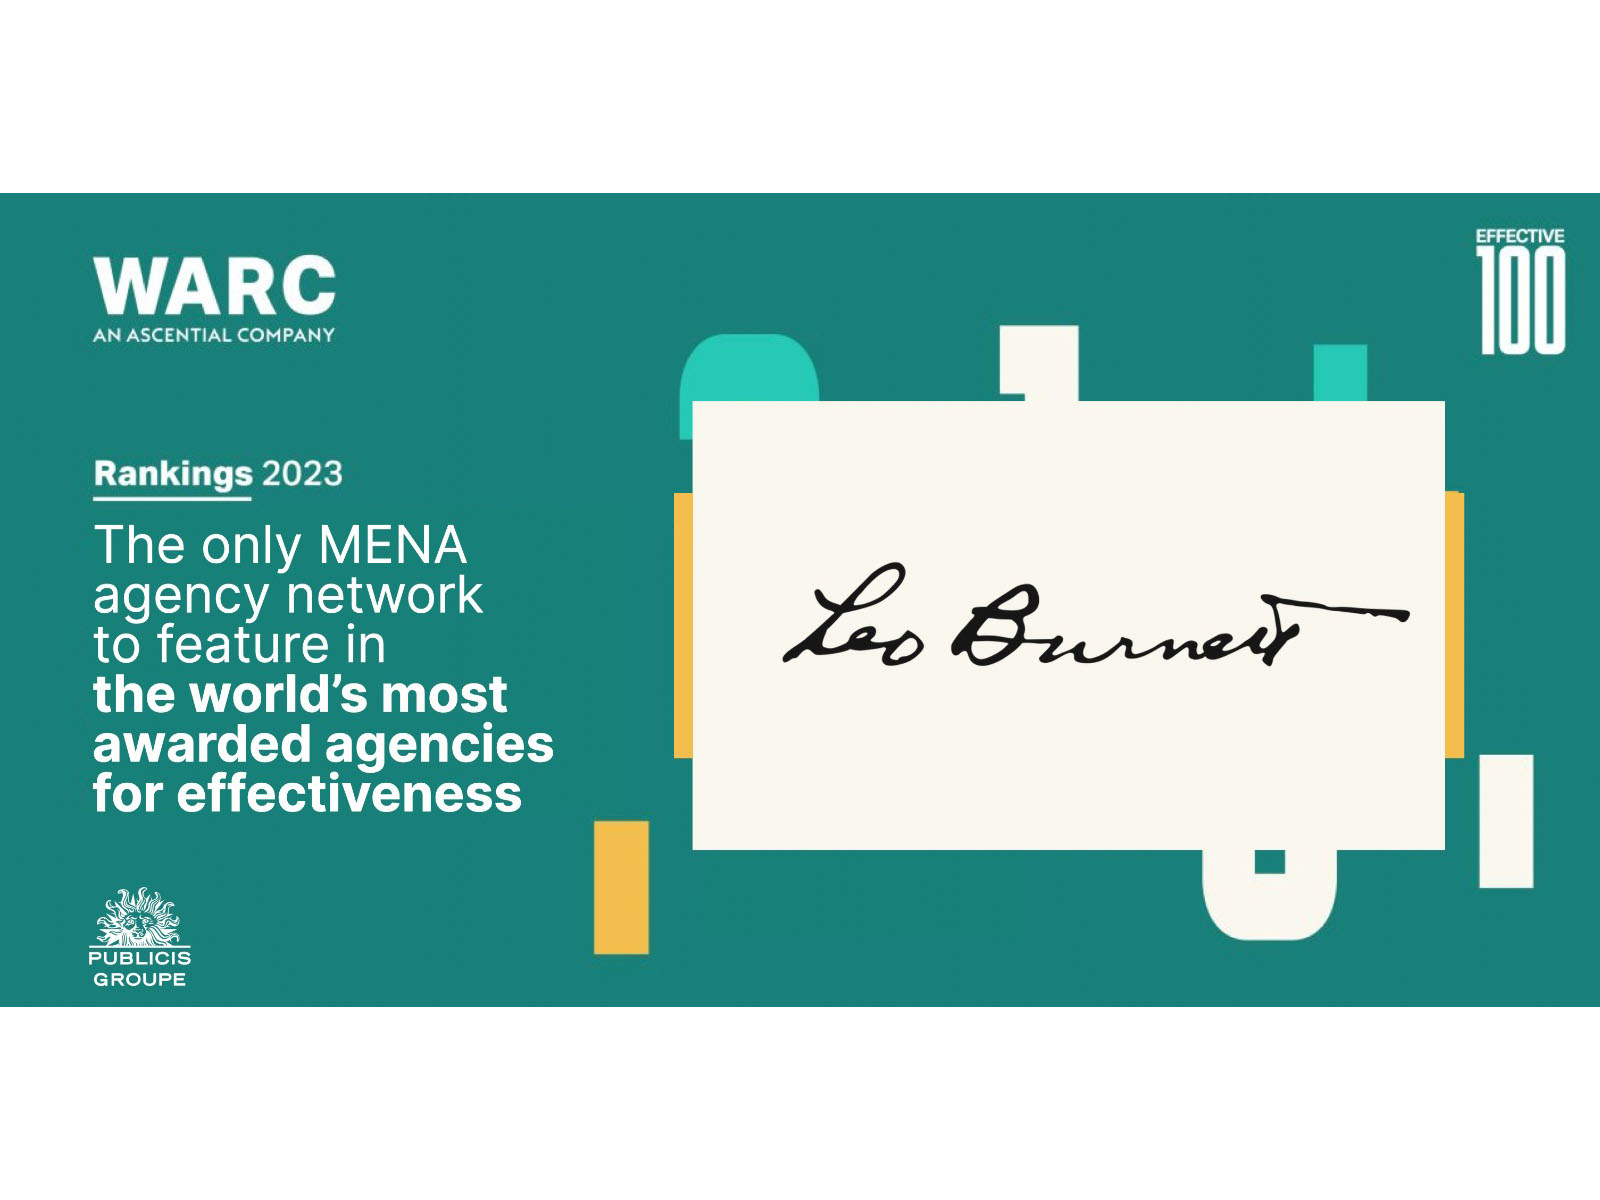 Leo Burnett is first and only MENA agency to enter the WARC Effective 100